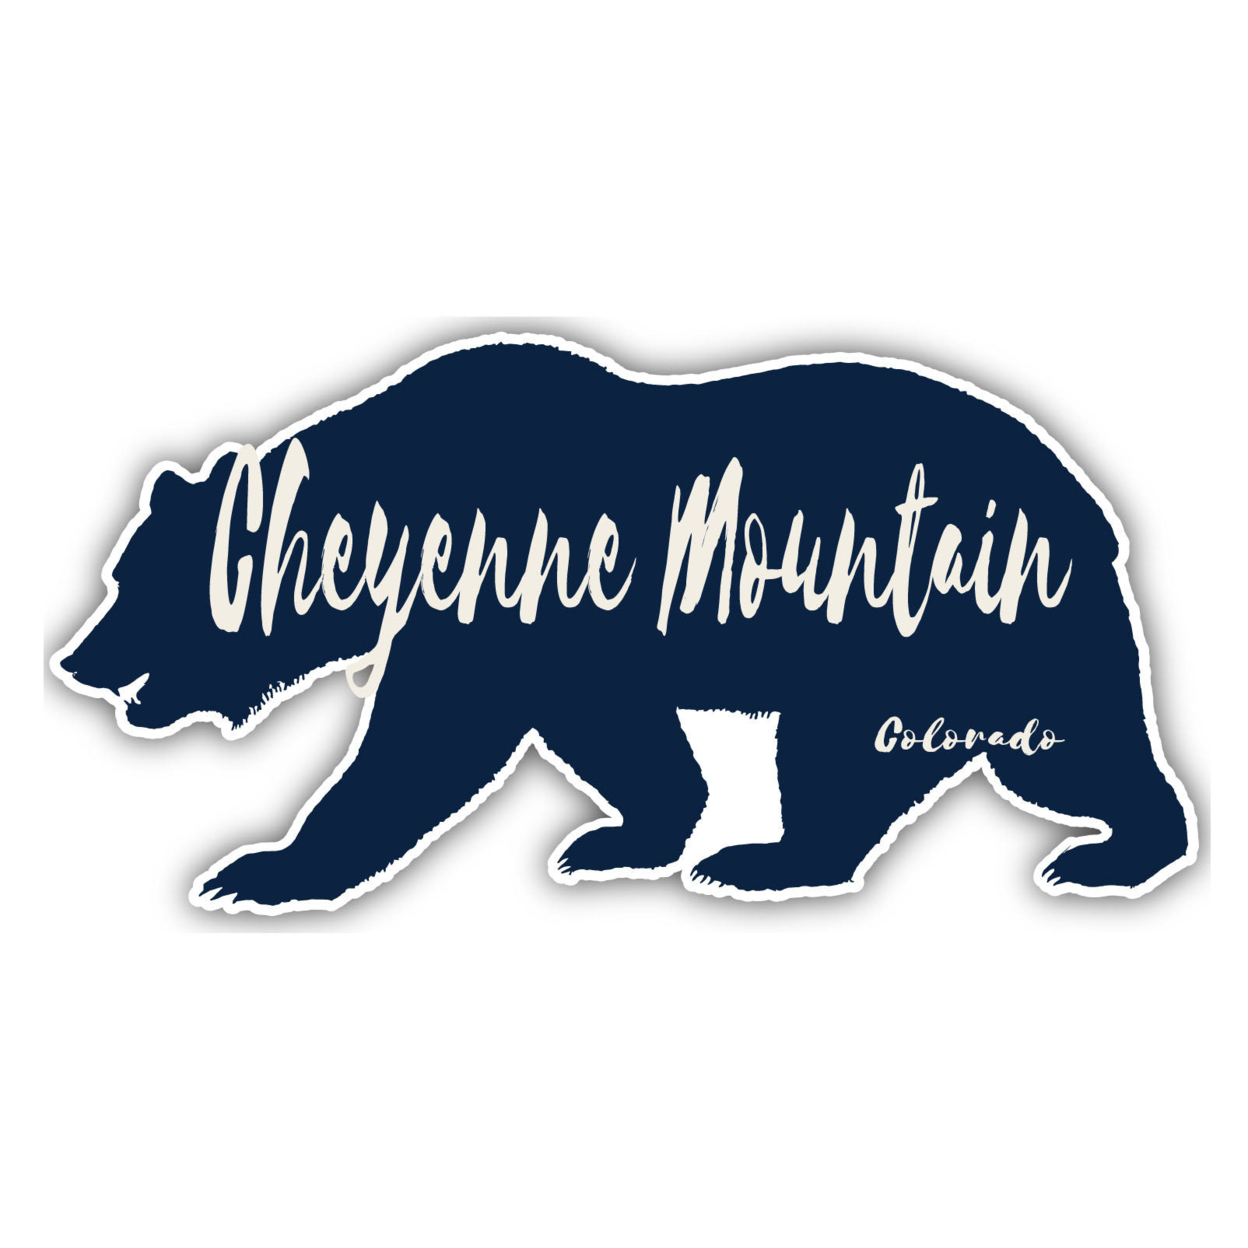 Cheyenne Mountain Colorado Souvenir Decorative Stickers (Choose Theme And Size) - 4-Pack, 8-Inch, Camp Life